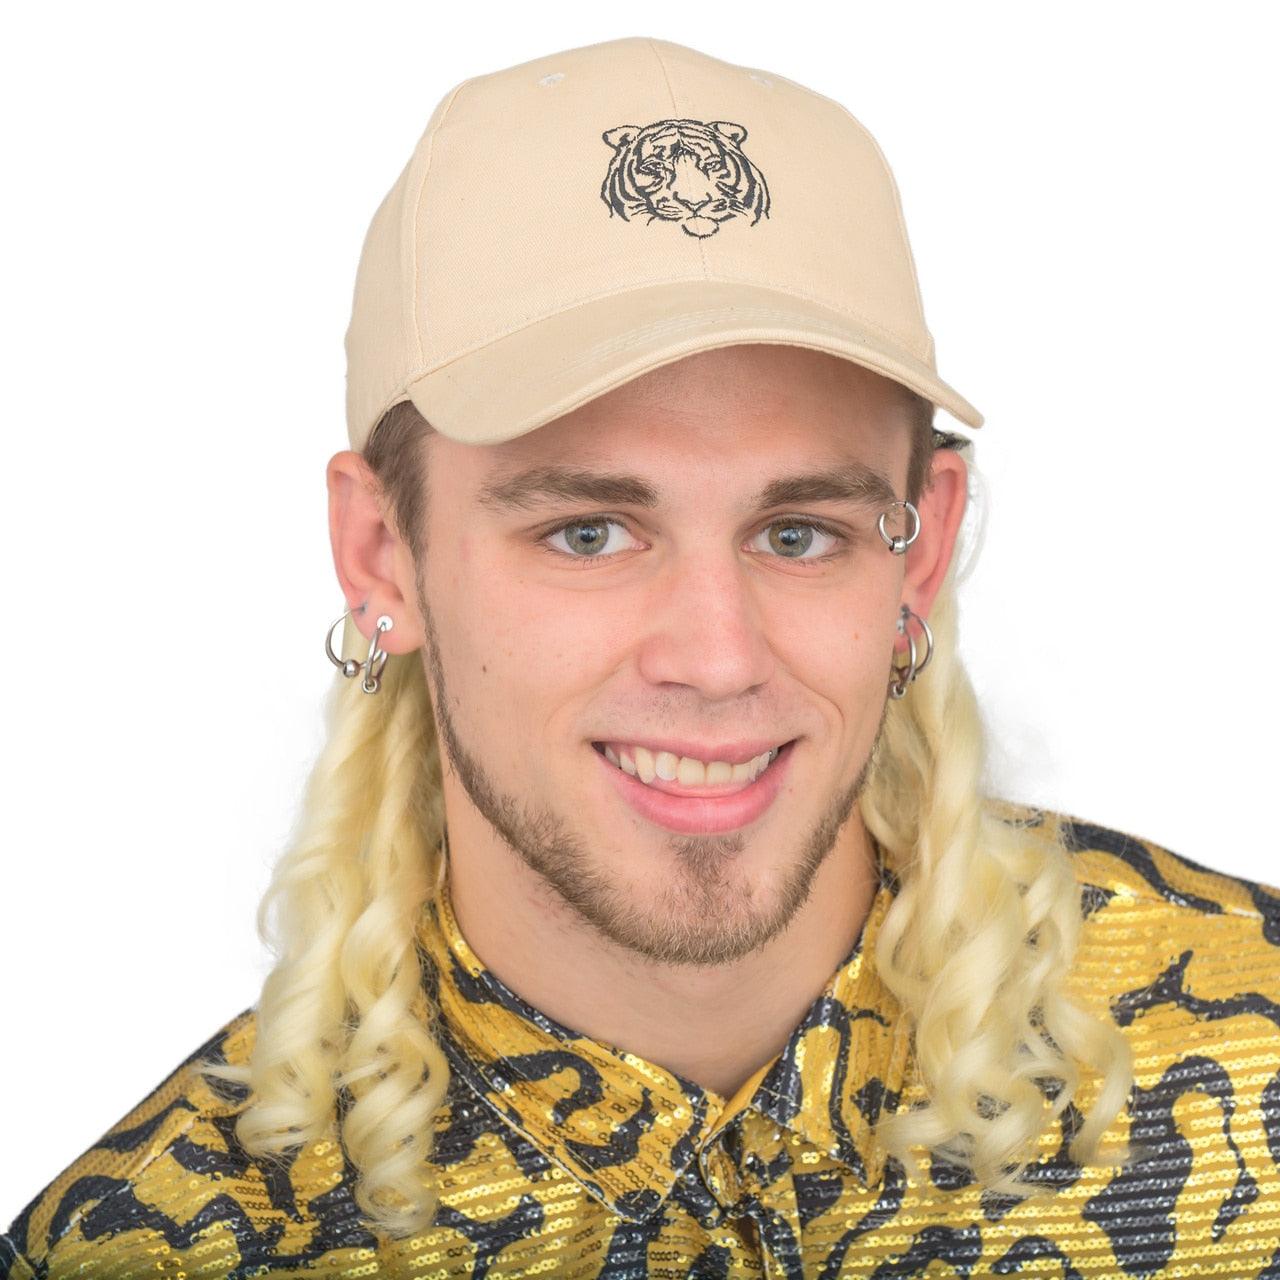 The King of Tigers Halloween Costume Hat and Wig Set